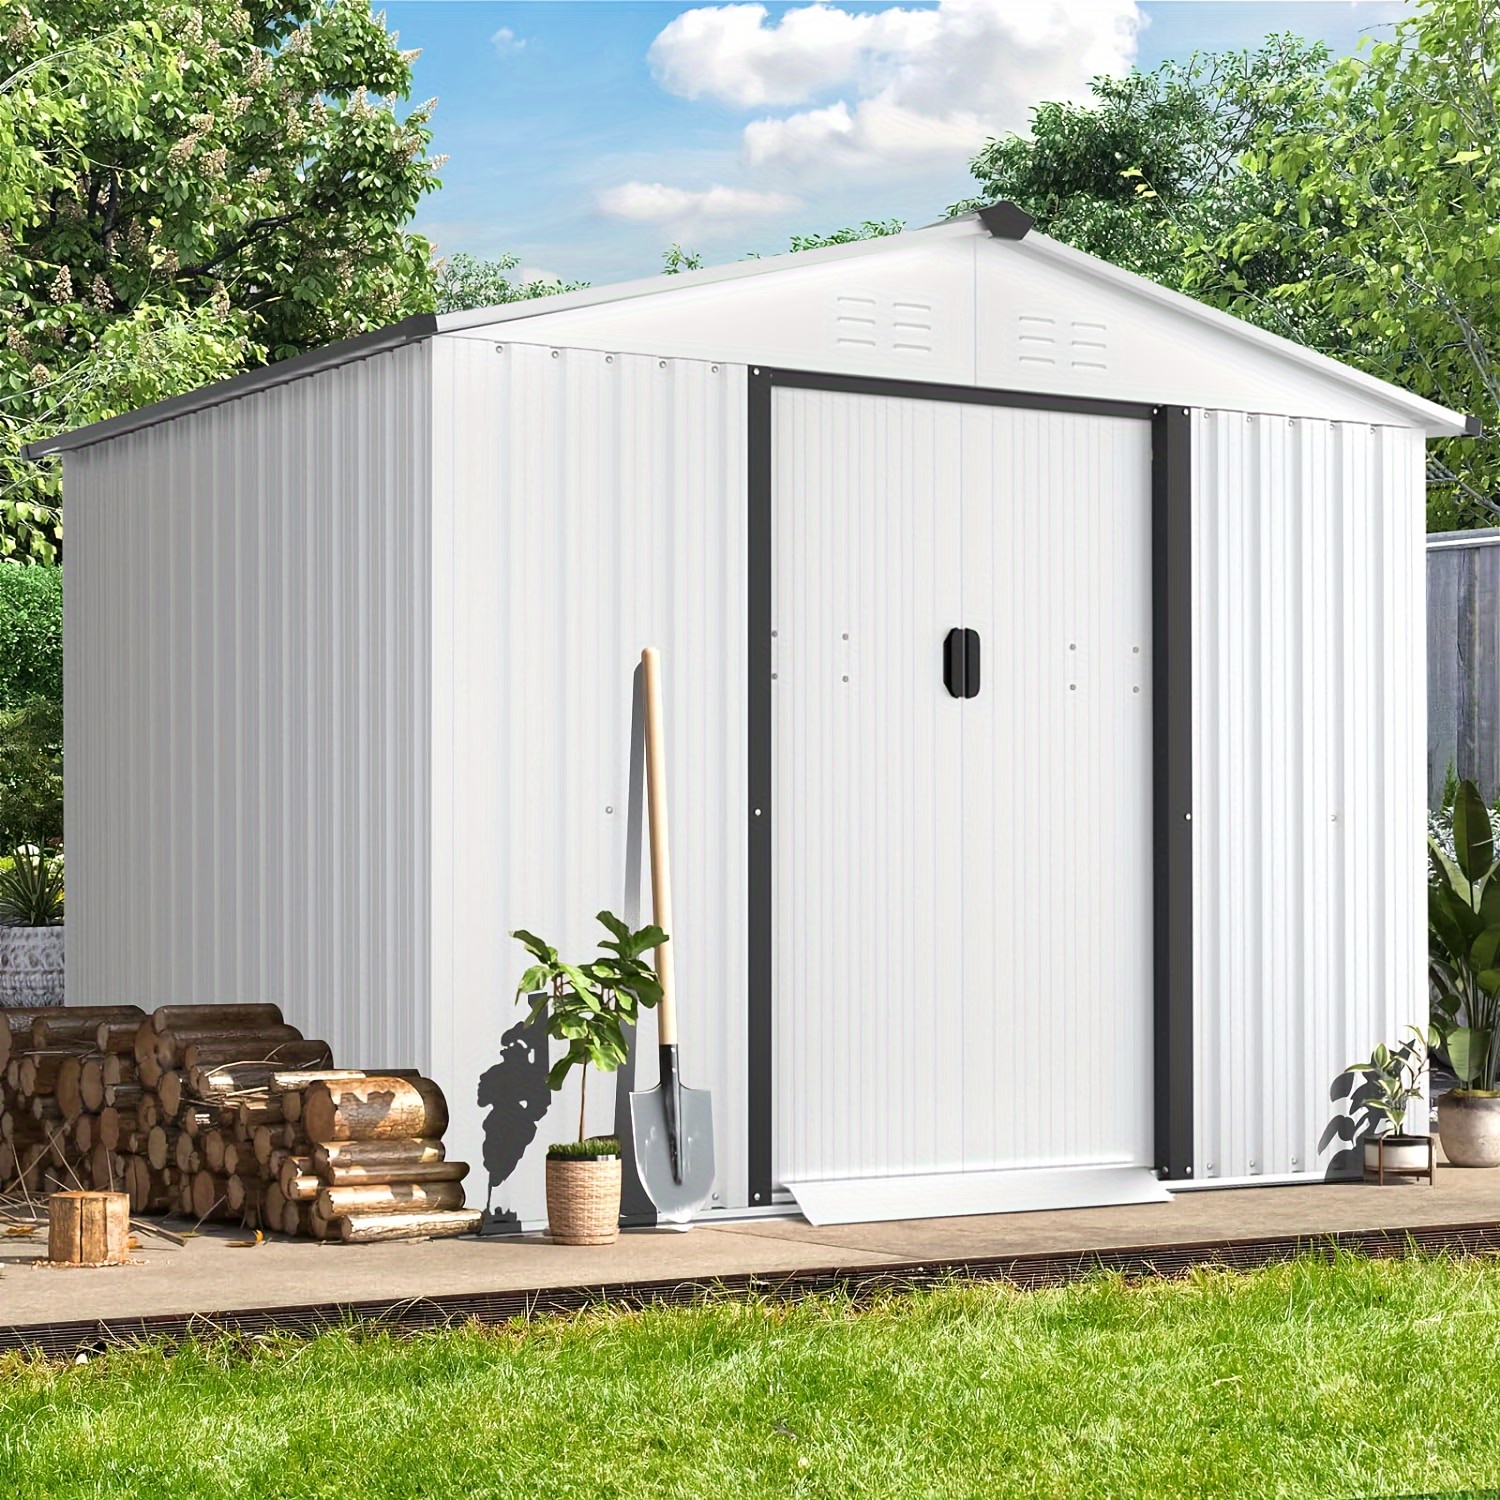 

8x6 Ft Spacious Waterproof Metal Storage Shed, Sliding Door, Lawn Equipment Organizer, Garden, Backyard Storage Solution, Durable, Rust-resistant, And Easy To Assemble, Gray, White